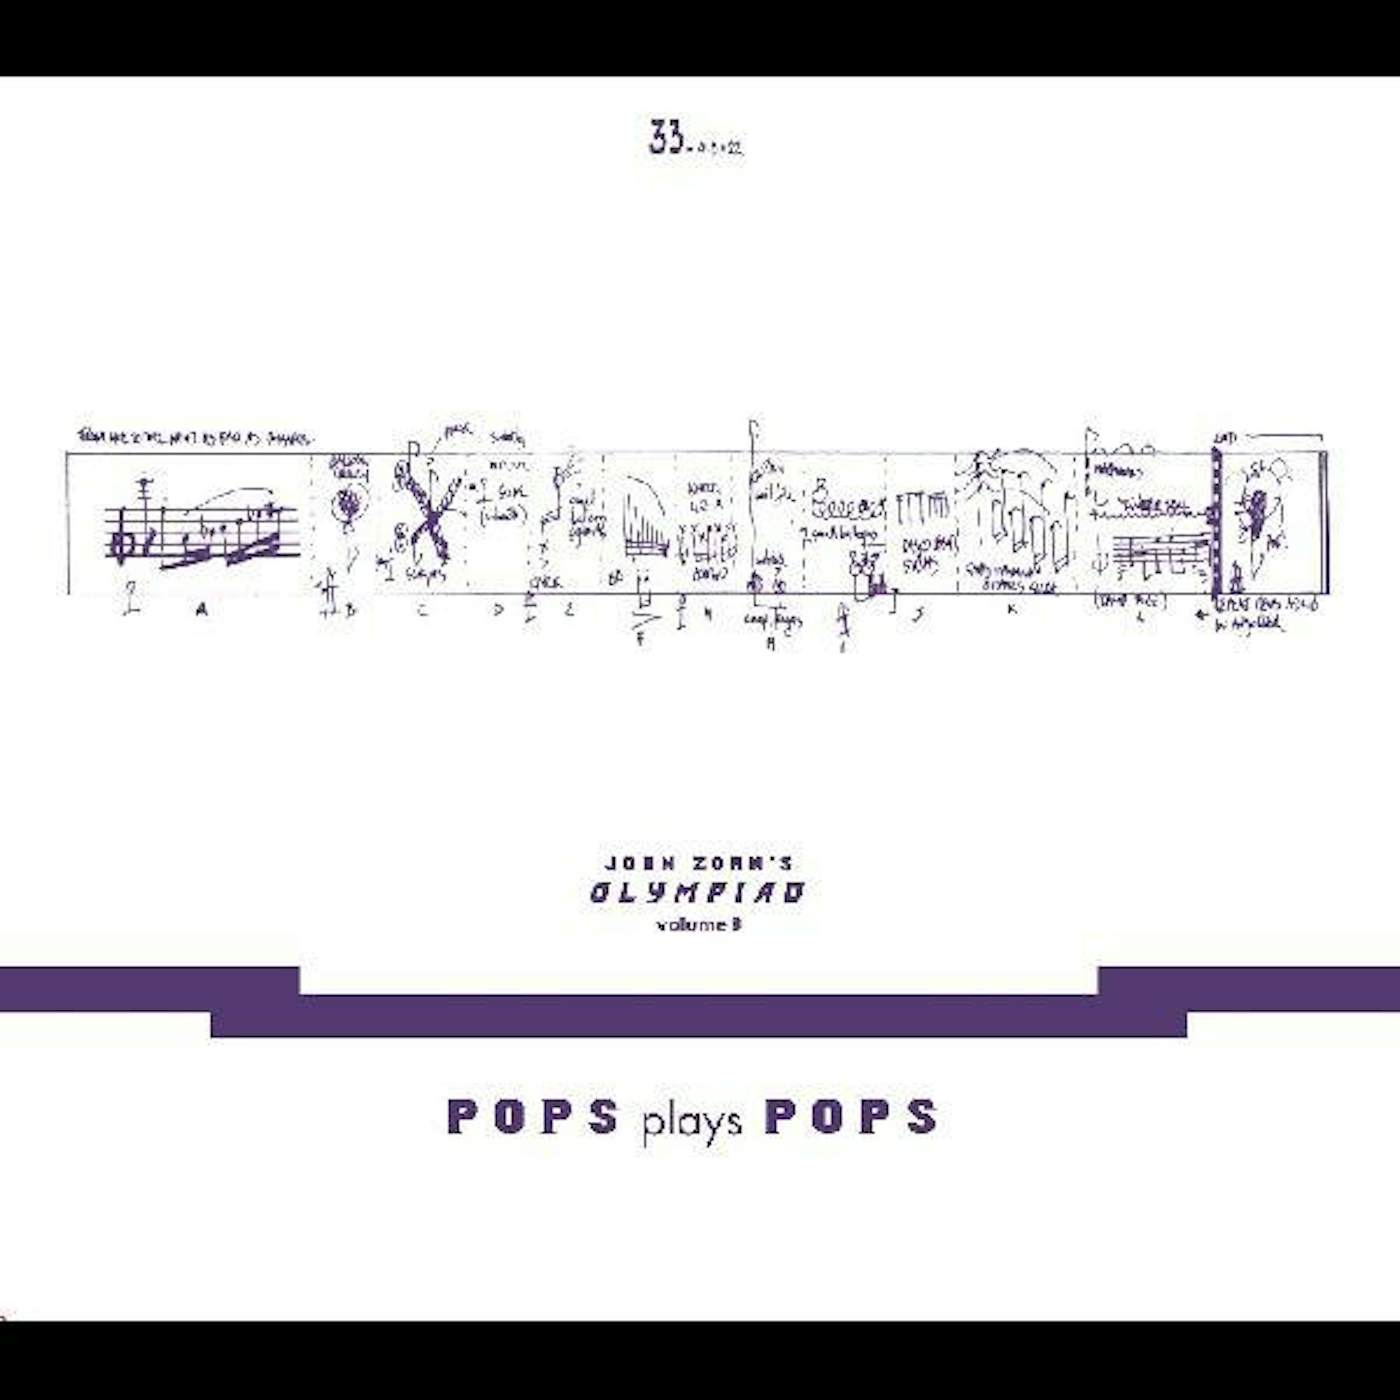 JOHN ZORN’S OLYMPIAD VOL. 3 - POPS PLAYS POPS - EUGENE CHADBOURNE PLAYS THE BOOK OF HEADS CD